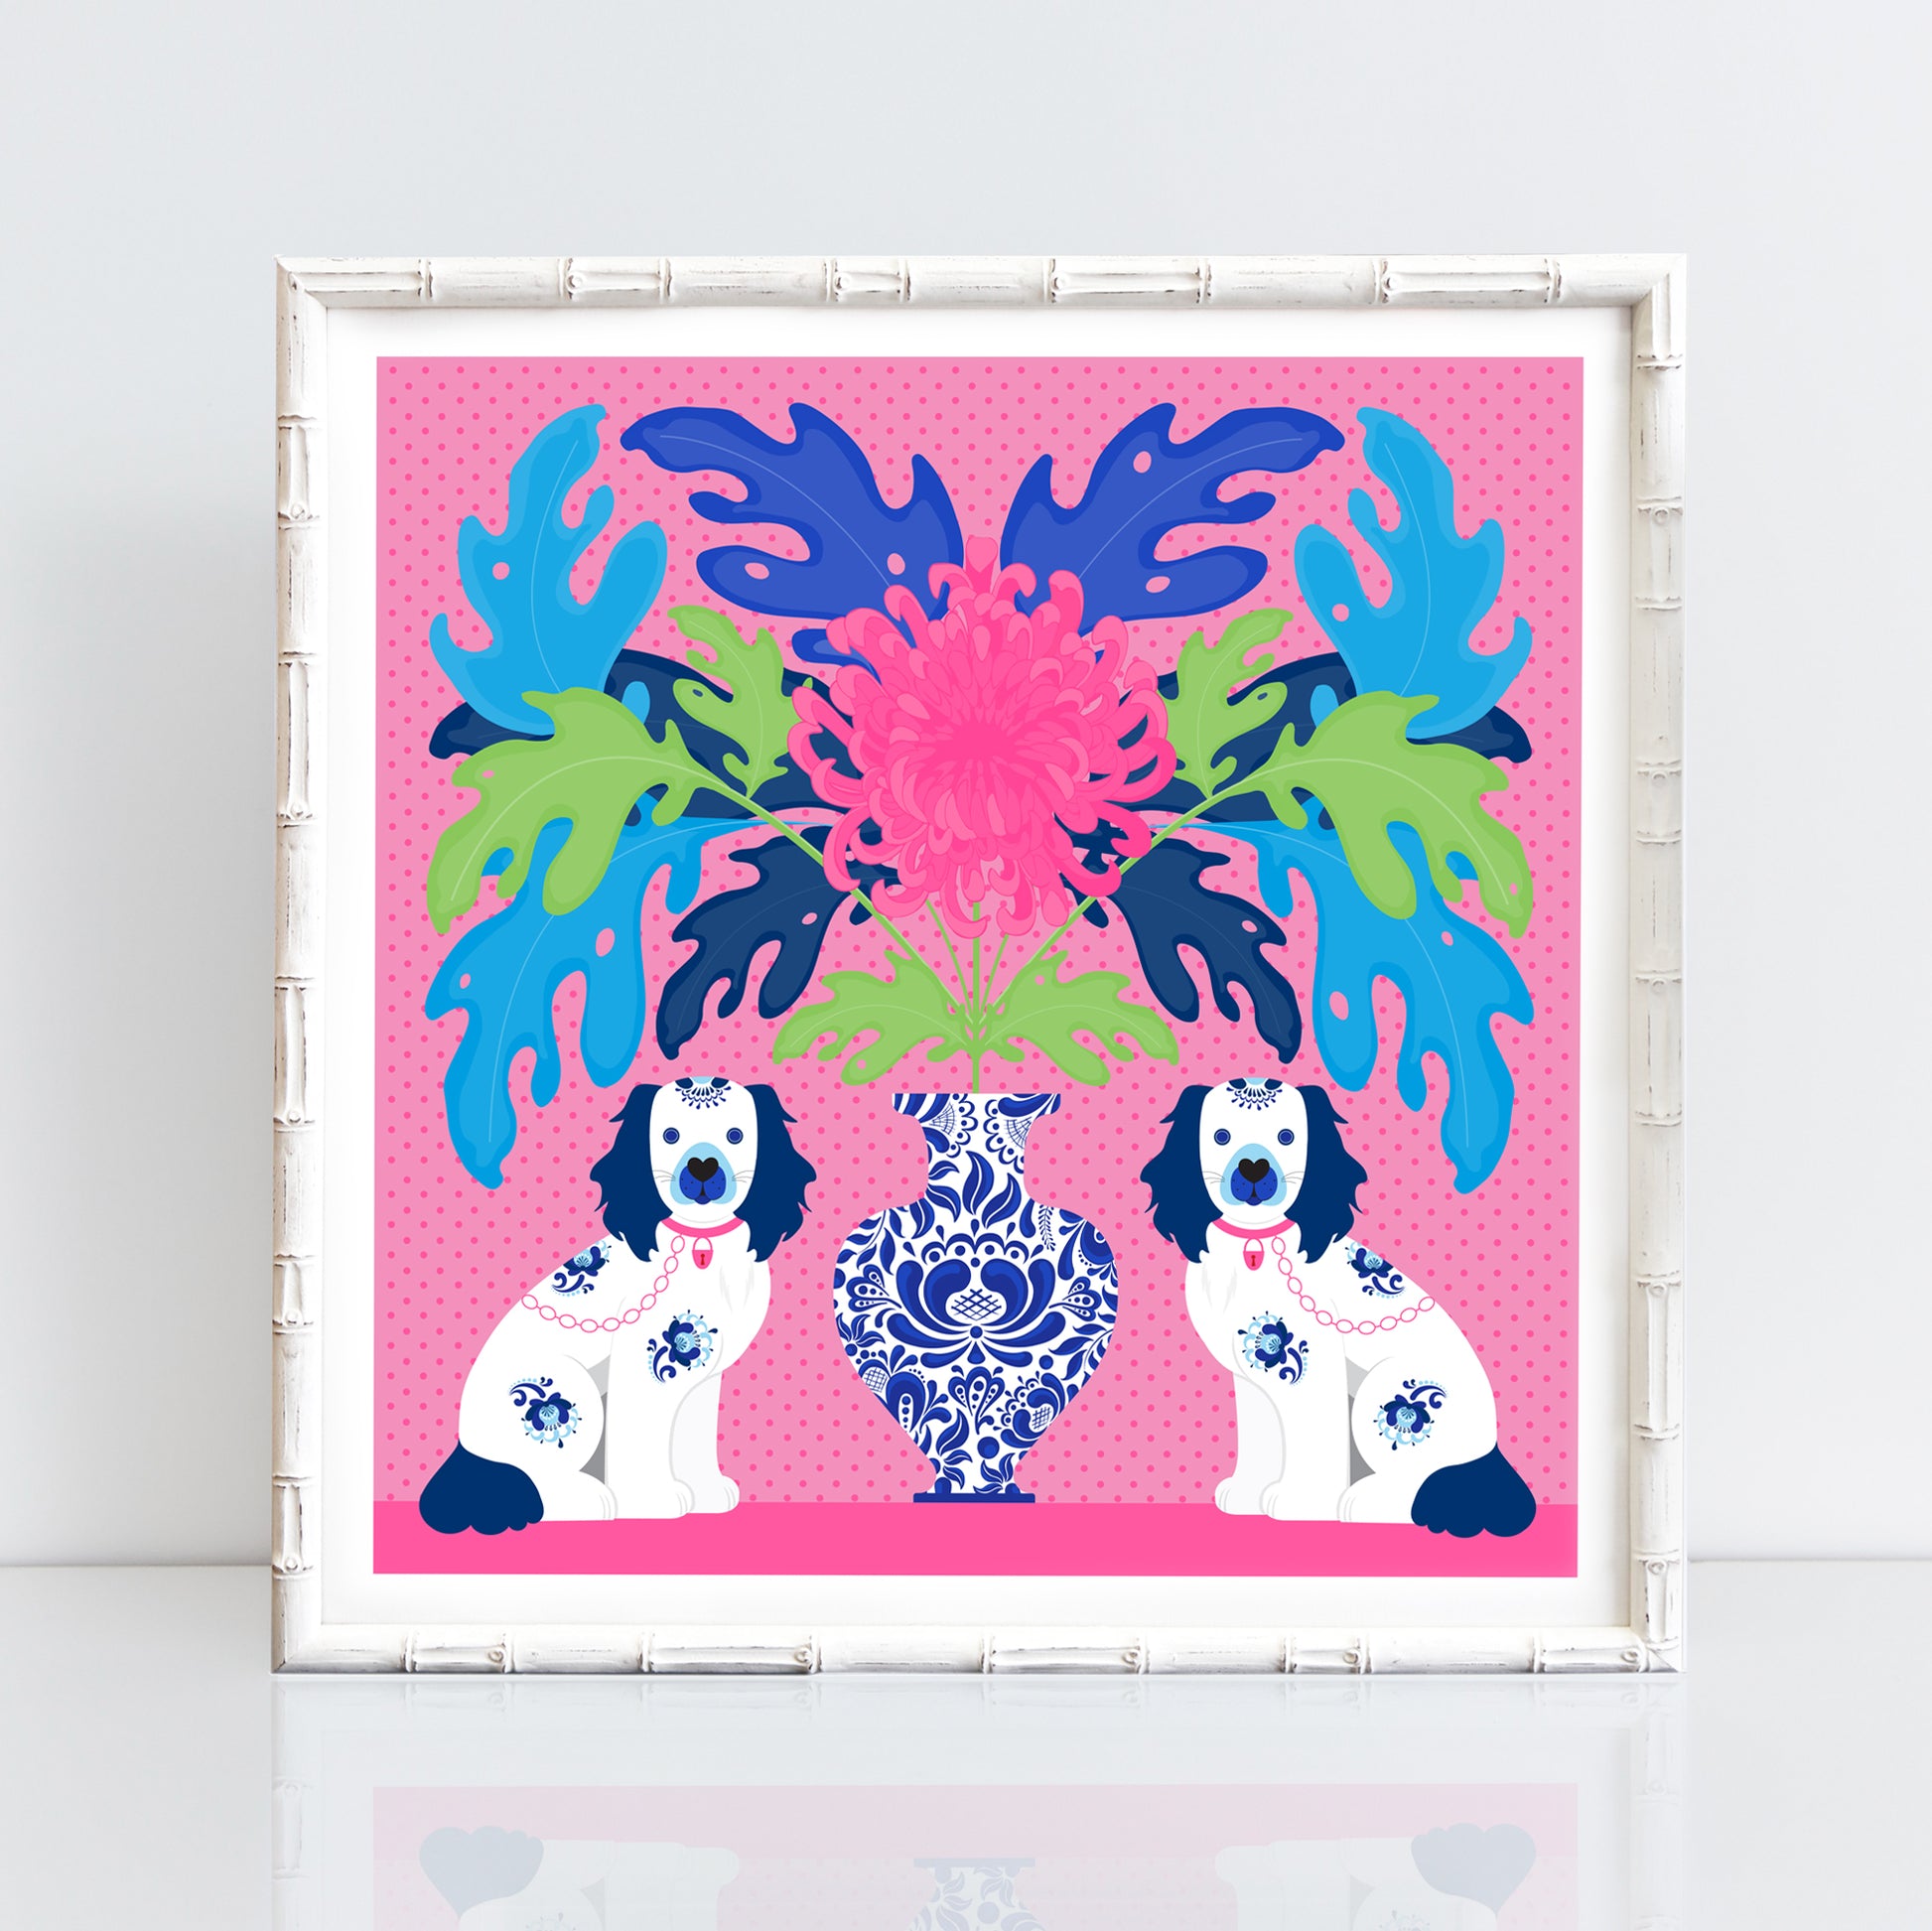 bold and fun original illustration of Staffordshire dog figurines, the classic spaniel shown in blue and white china sitting with a ginger jar with a single bright pink chrysanthemum flower and colouful leaves